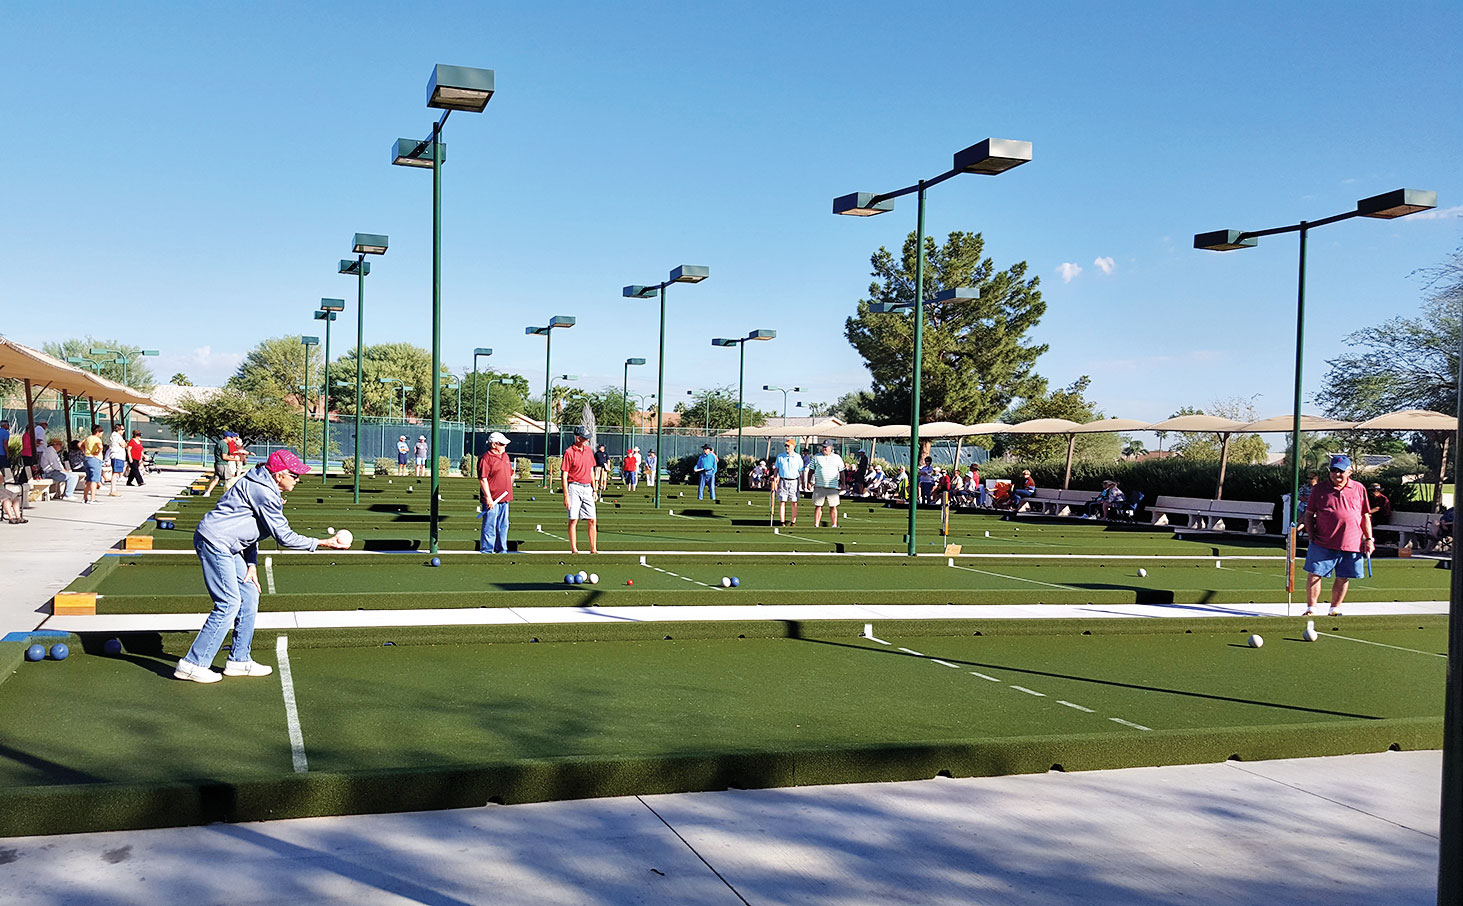 Members of the PebbleCreek Bocce Ball Association are actively involved in competition on a beautiful day at the community’s state-of-the-art Bocce Complex at Eagle’s Nest. A total of 65 teams are now in the final weeks of the 2016 fall bocce ball season. The top ranking teams will be recognized at the Association’s annual Meeting and Potluck Dinner on January 8, 2017.